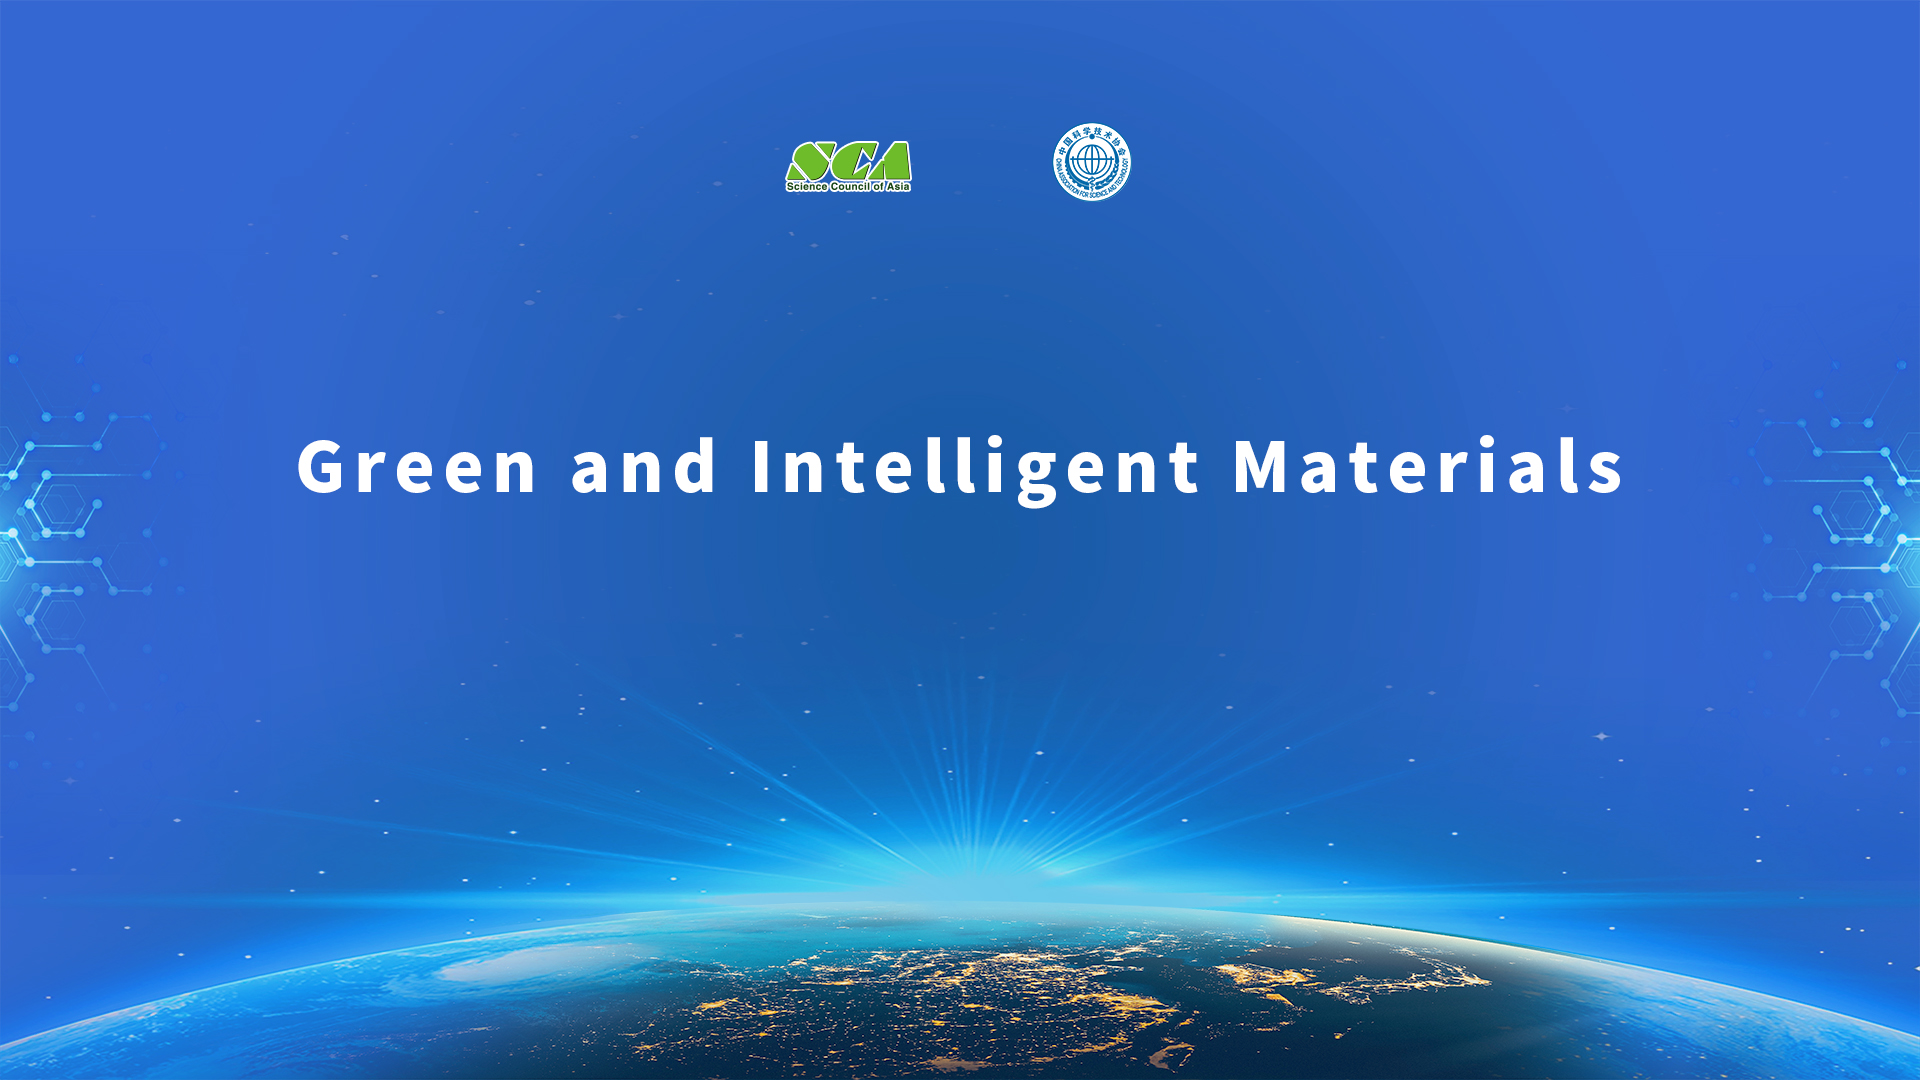 Session 2: Green and Intelligent Materials